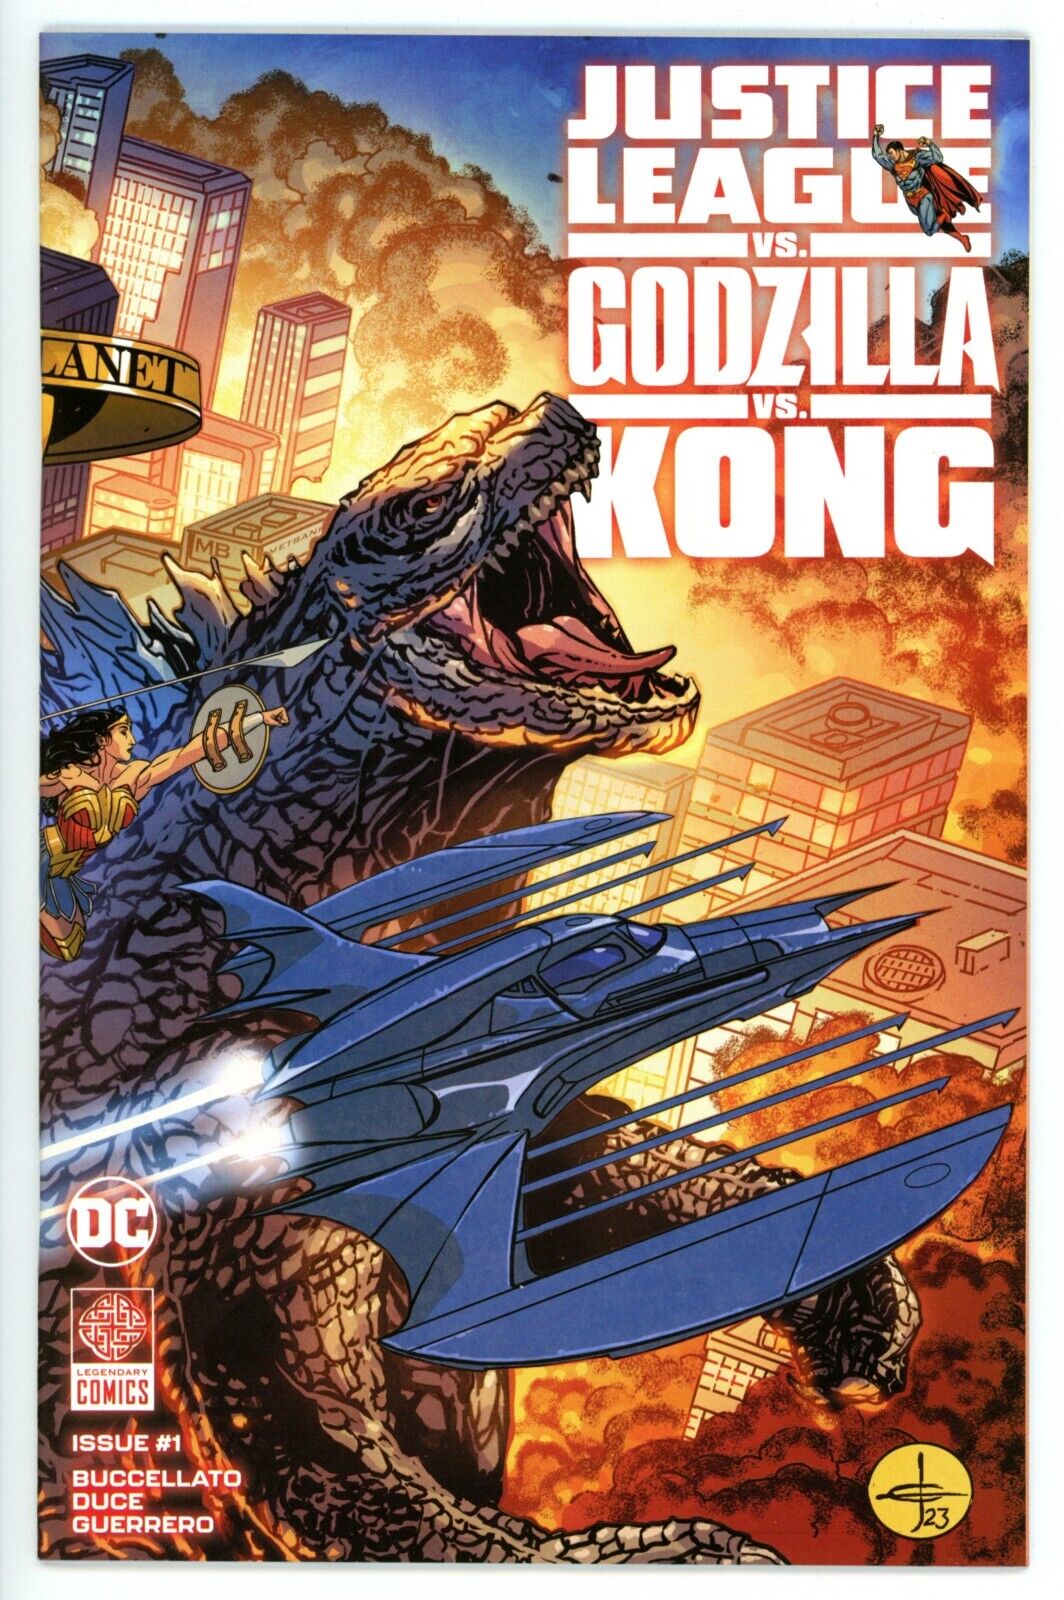 Justice League vs. Godzilla vs. Kong #1  |  Cover A  |    First Print  |  NM NEW